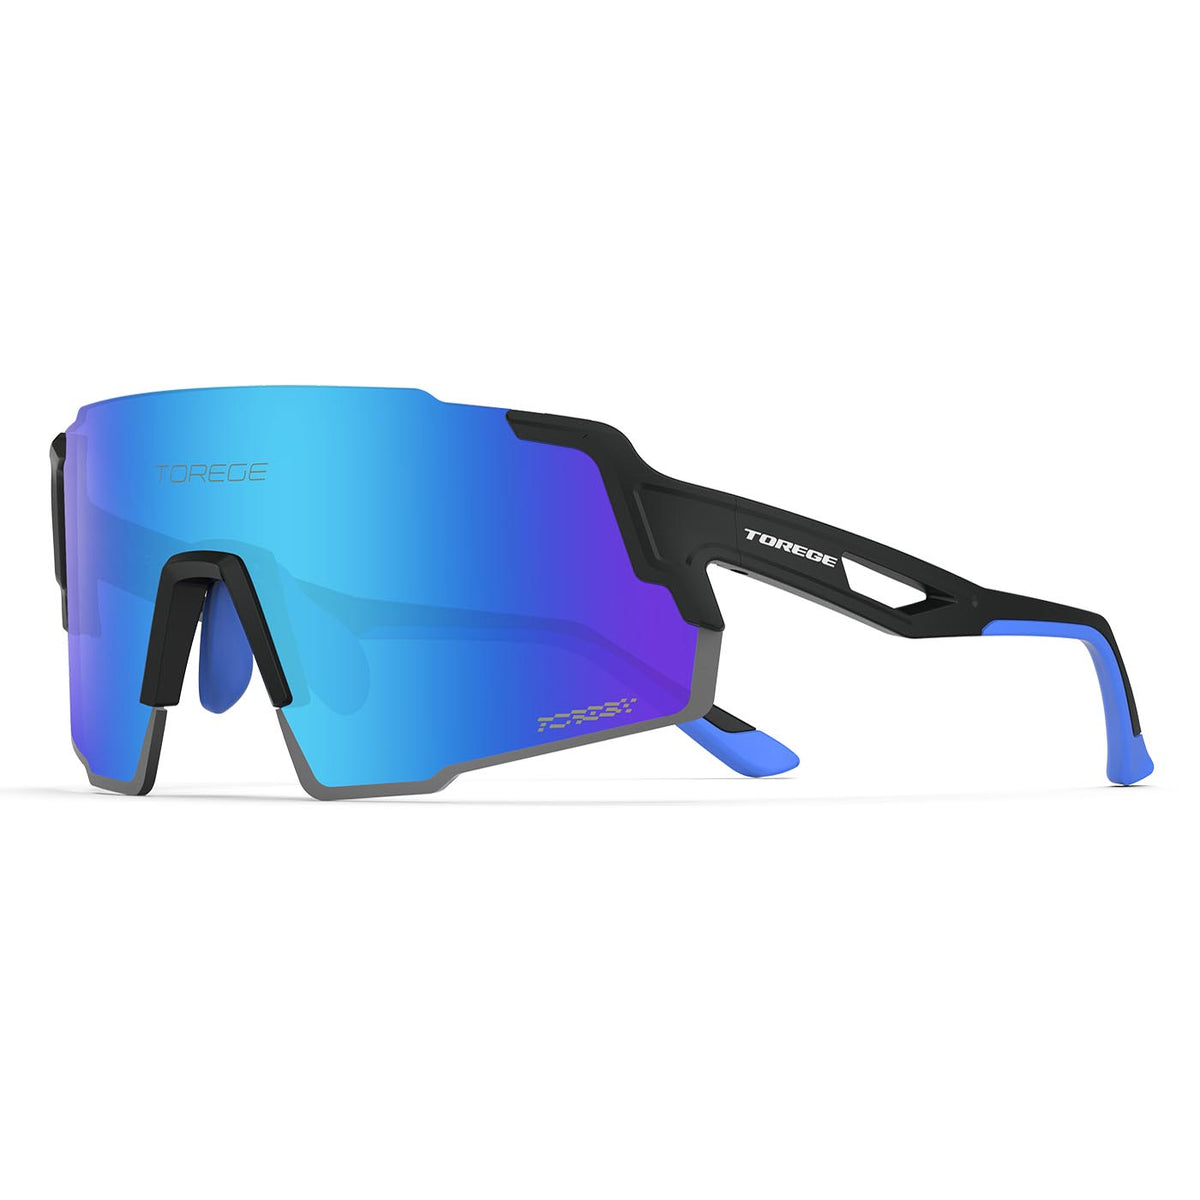 Blue Lightning Ultra Lightweight Sports Sunglasses for Men & Women with Lifetime Warranty- Perfect for Cycling, Hiking, Fishing, Golf, and Running 